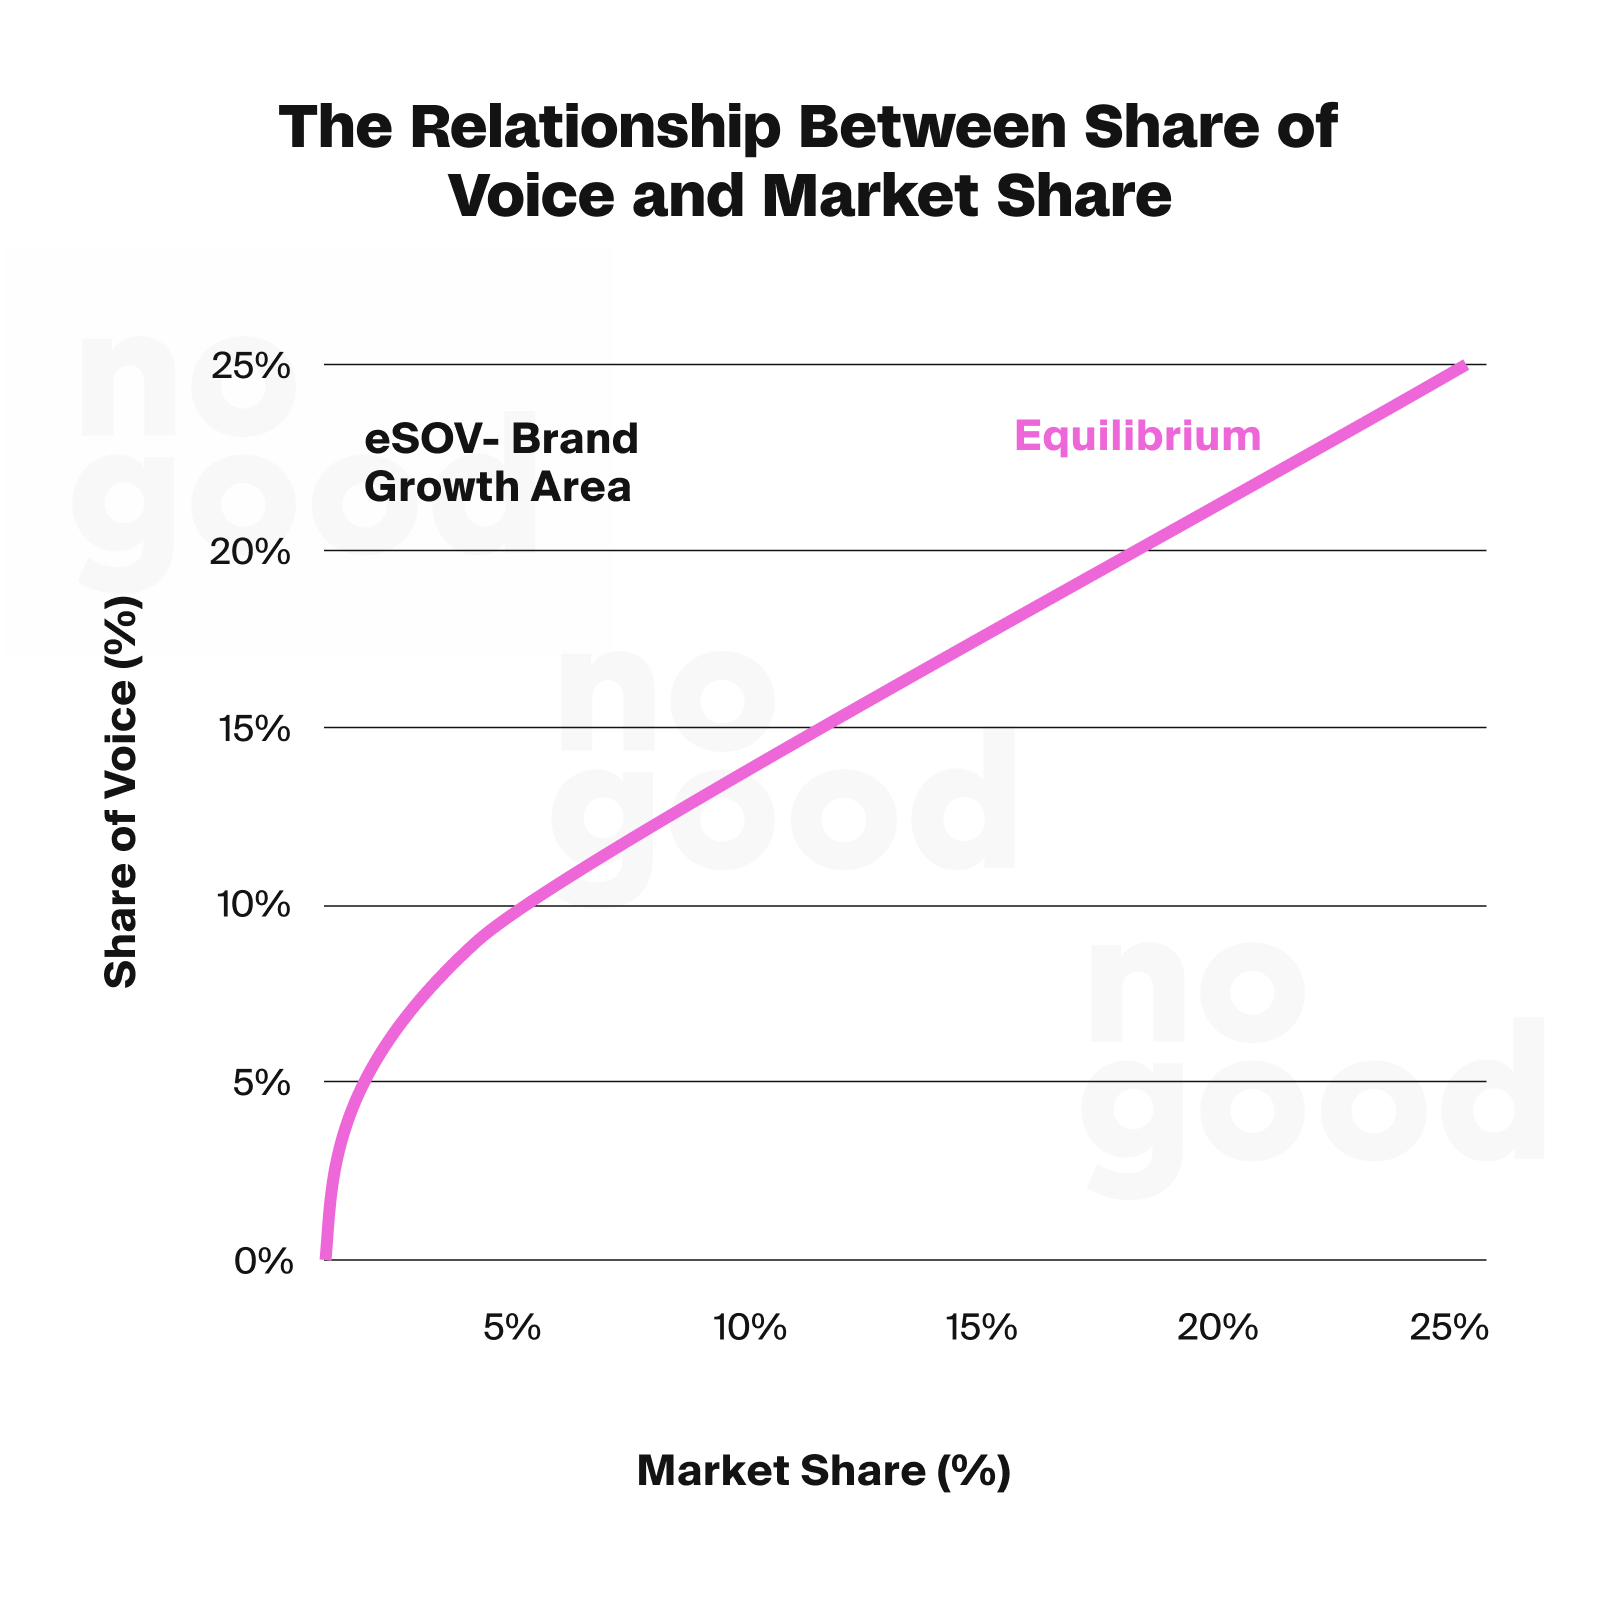 The relationship between share of voice (SOV) and Market share